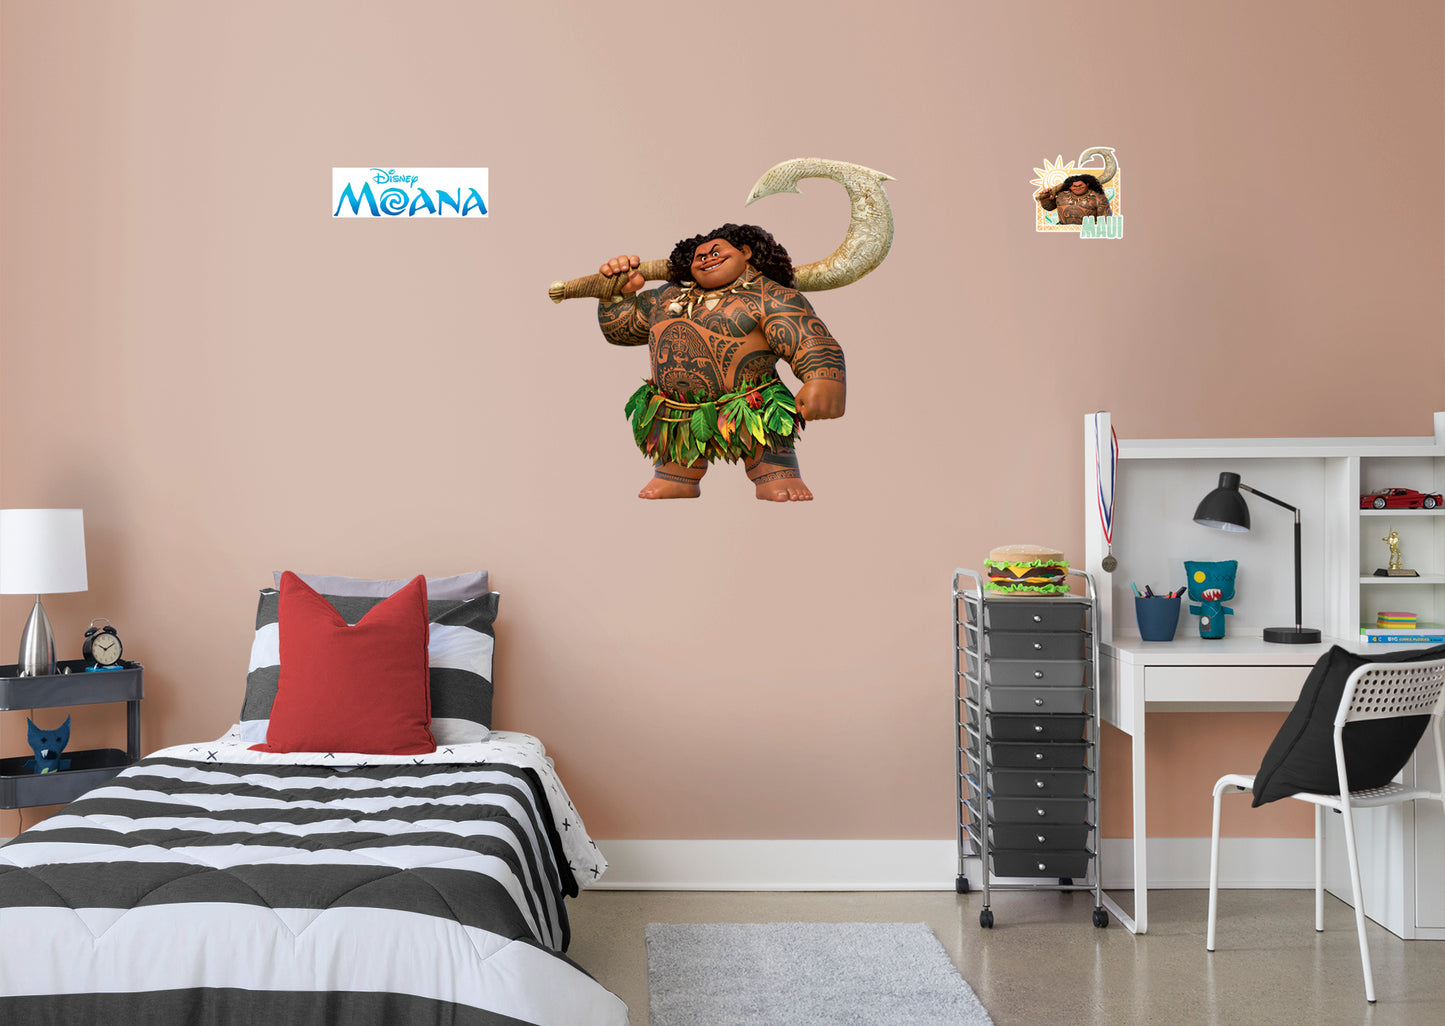 Moana: Maui RealBig        - Officially Licensed Disney Removable Wall   Adhesive Decal